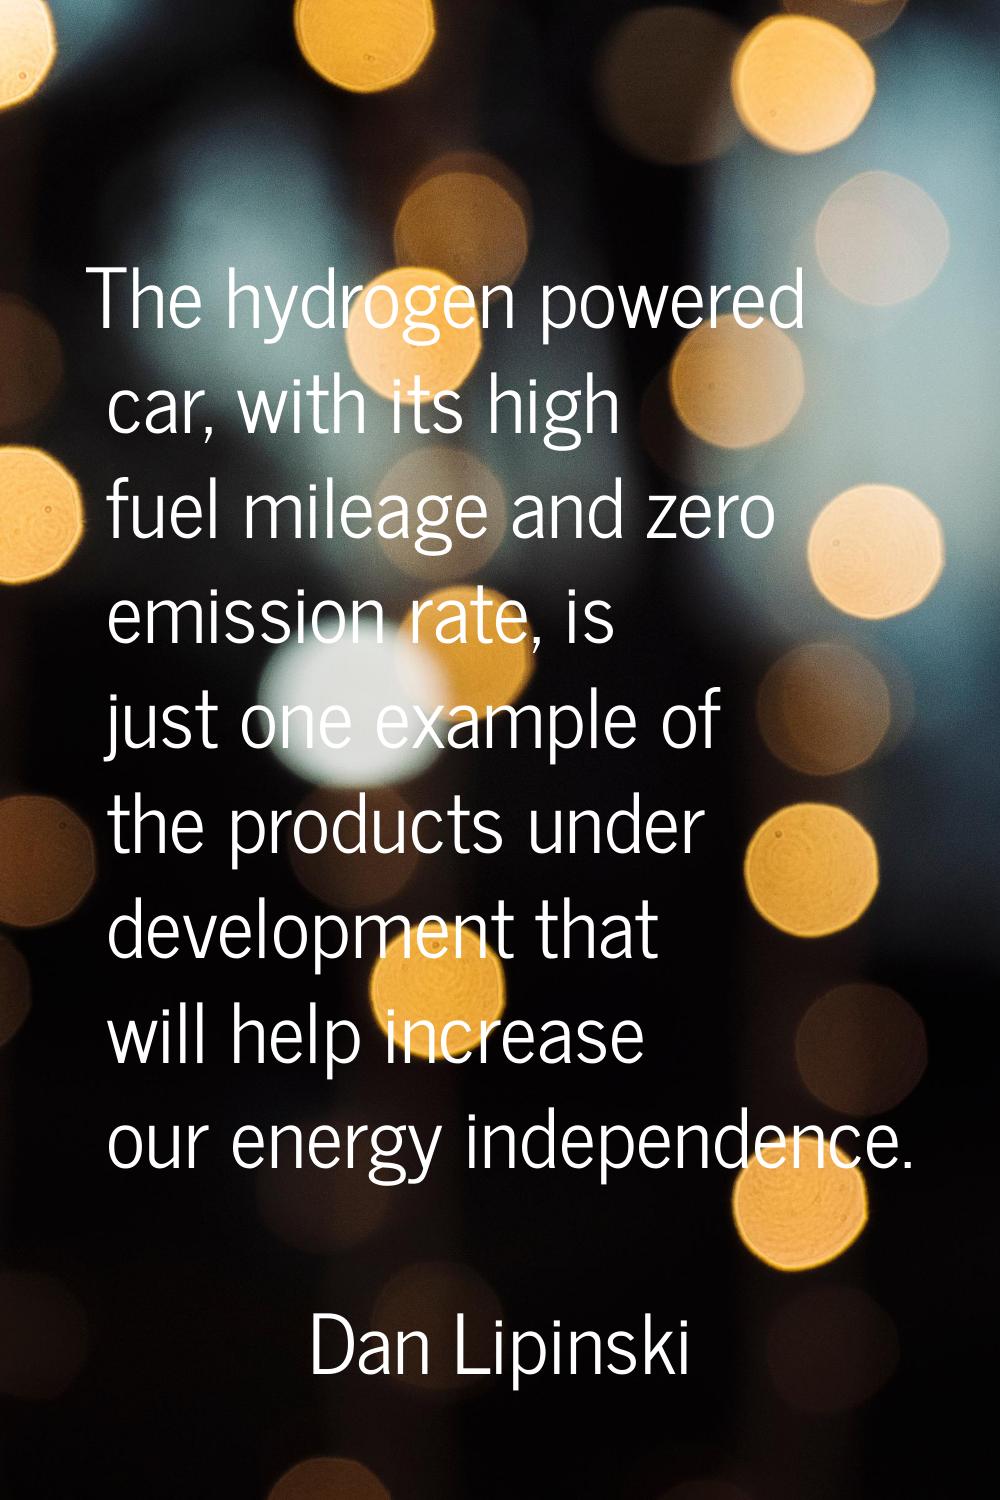 The hydrogen powered car, with its high fuel mileage and zero emission rate, is just one example of